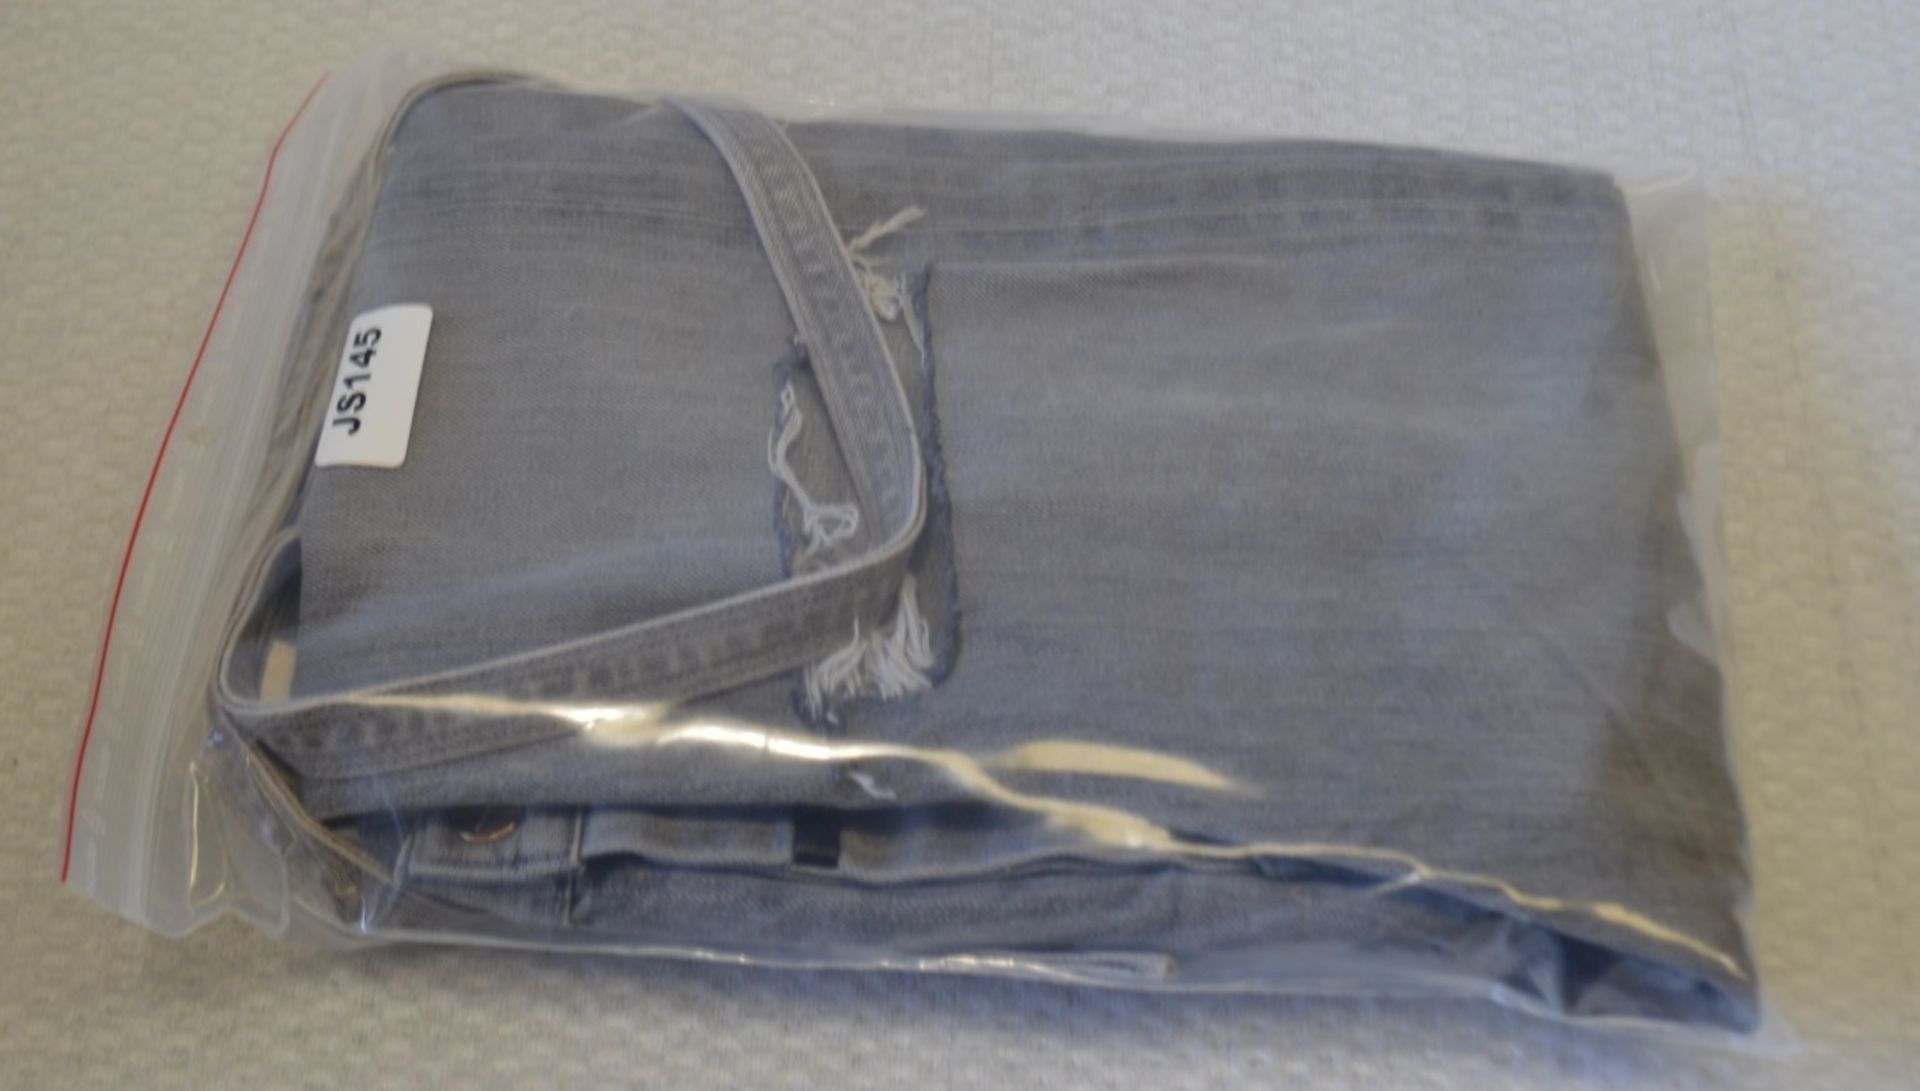 1 x Pair Of Men's Genuine Fear Of God Jeans - Grey With Rips - Size (EU/UK): 32/33/32/33 - - Image 5 of 7